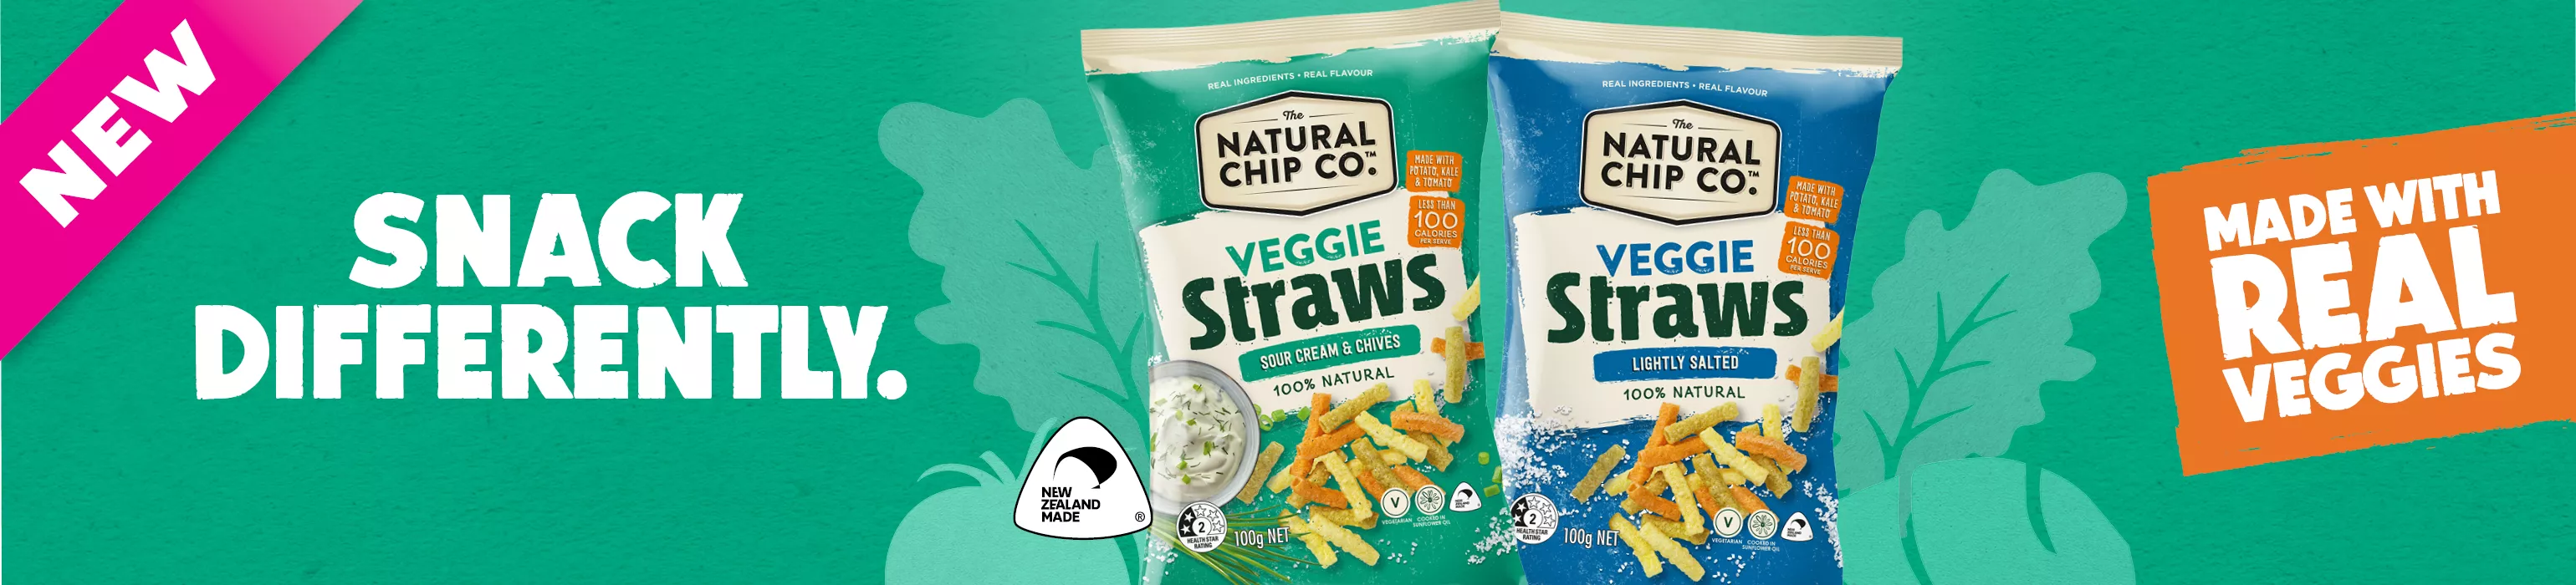 Natural Chip Co. Veggie Straws - Out Now!